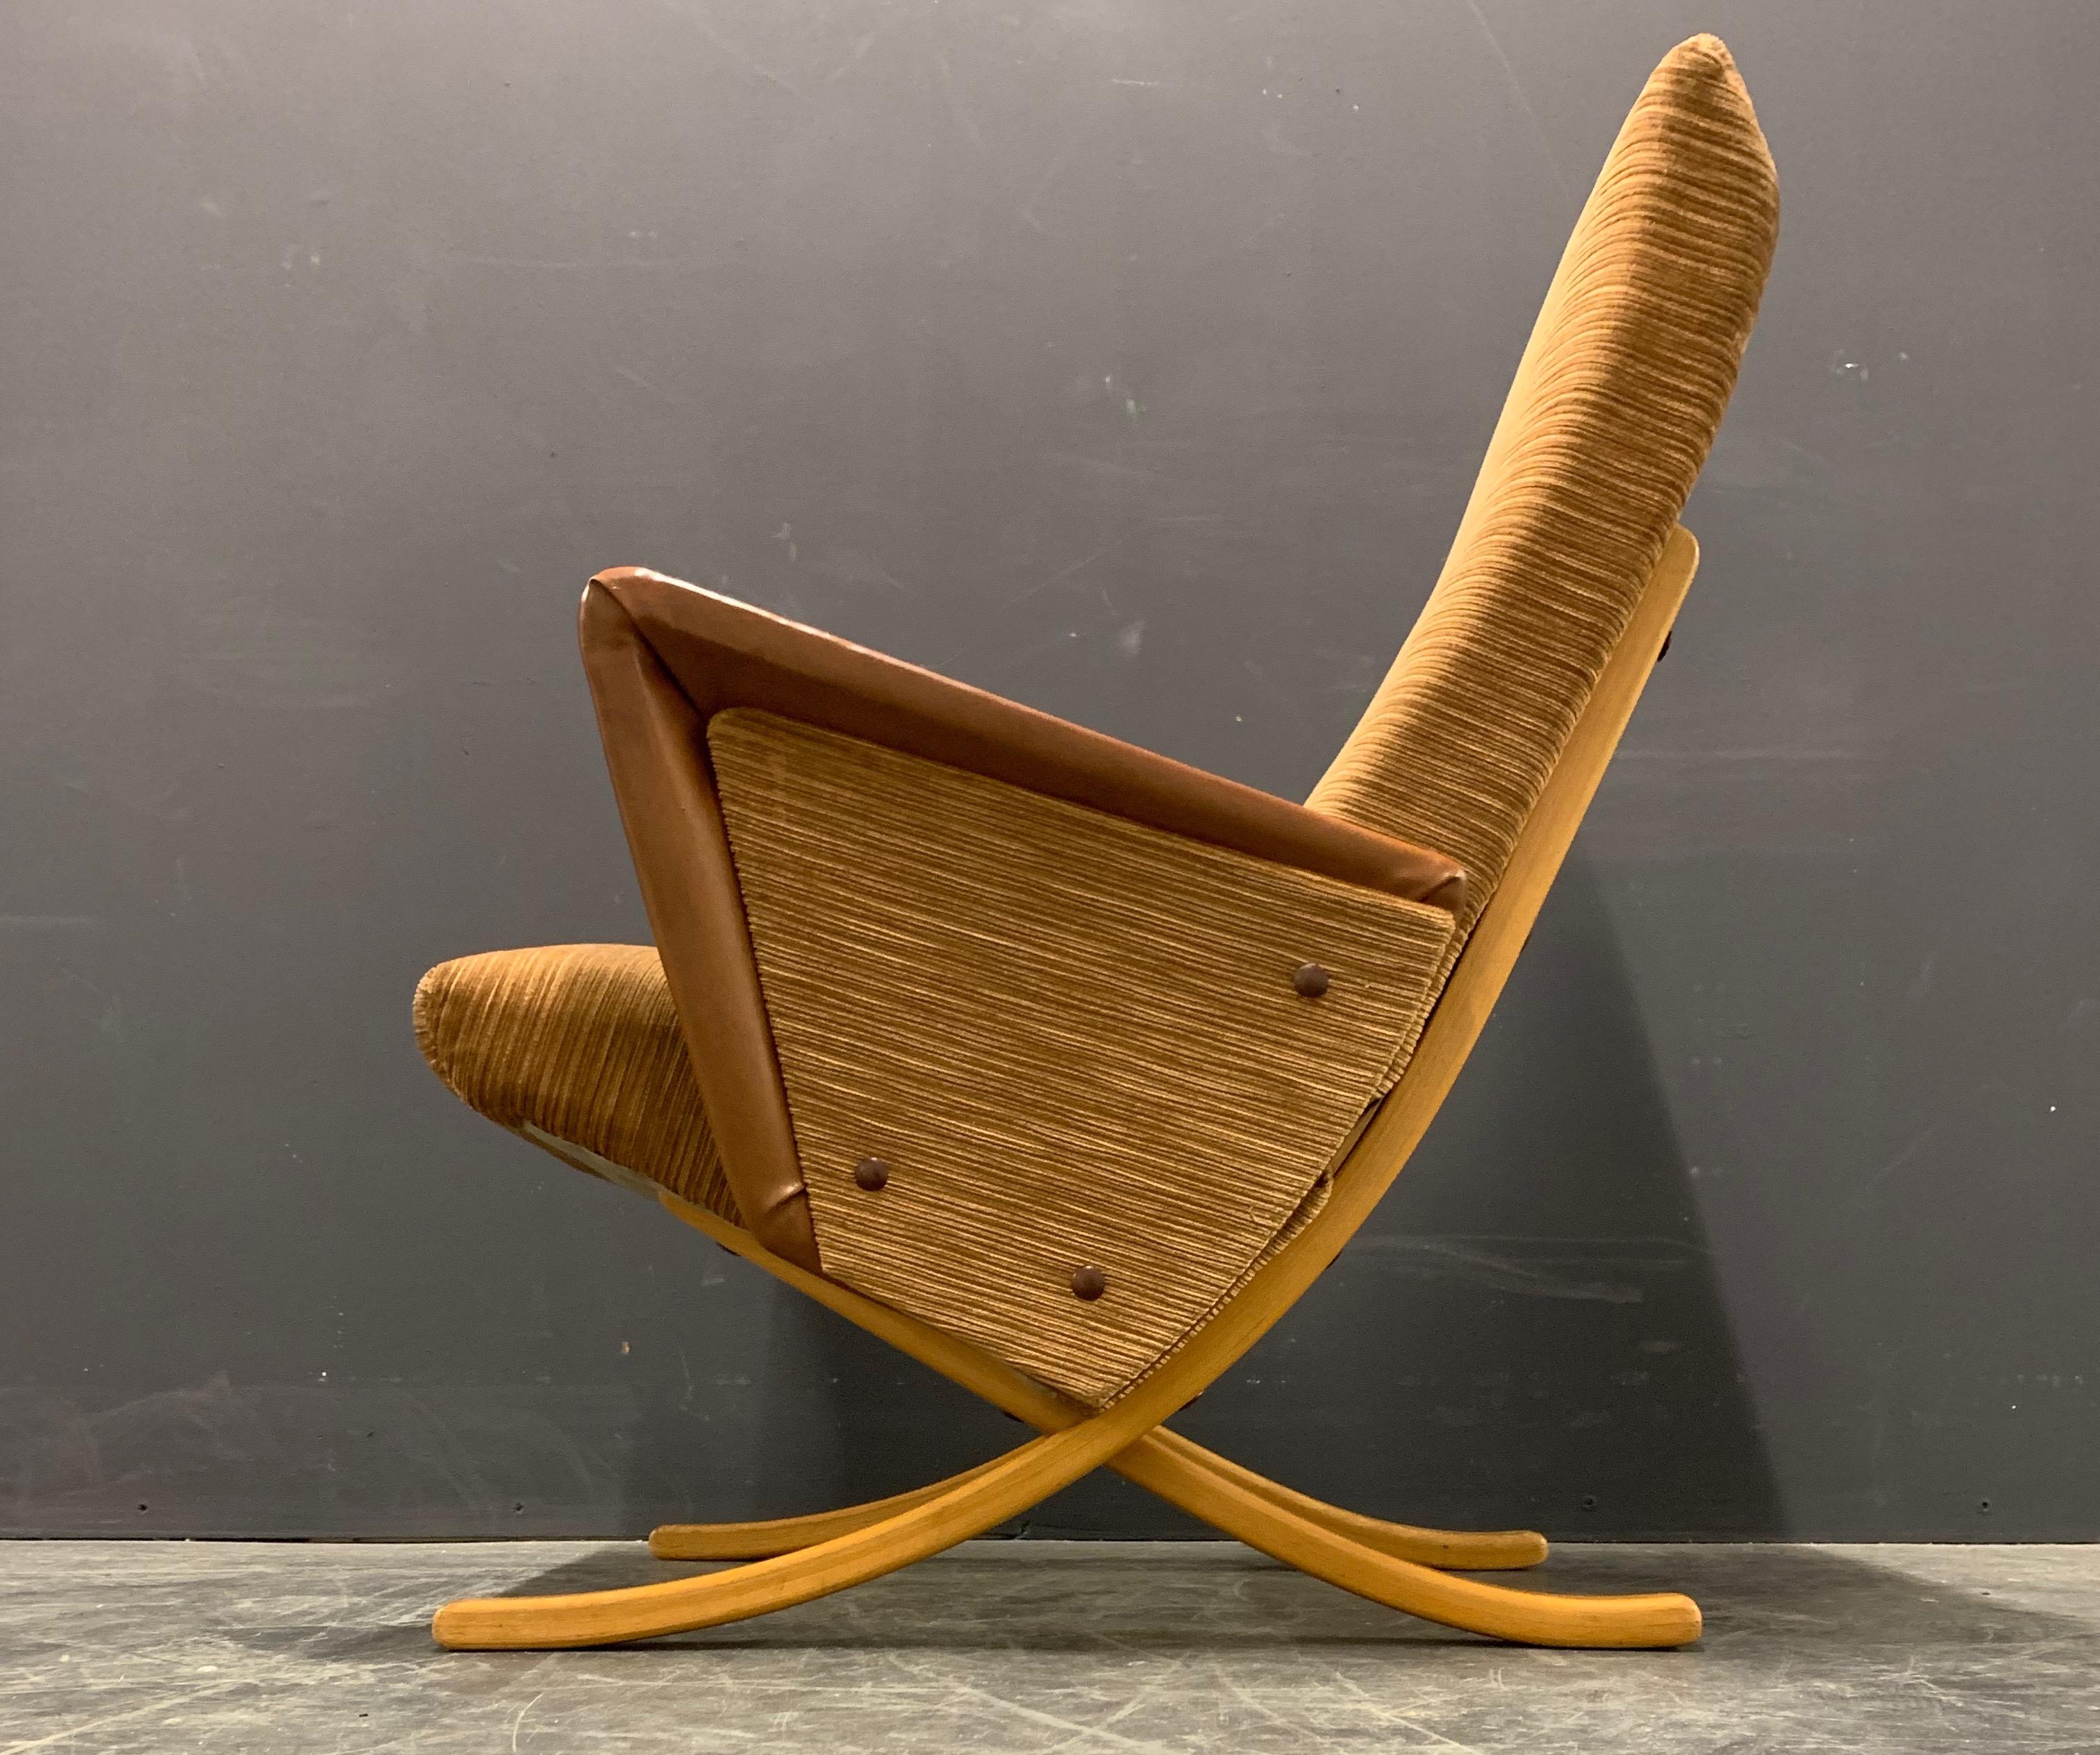 only a handful of tectaform chairs showed up on auctions the last 10 years, but this version with arms is previous unknown. it´s a very rare version of model no. 8xx. we are very proud to offer this chair from the original owner. 

arnold bode is